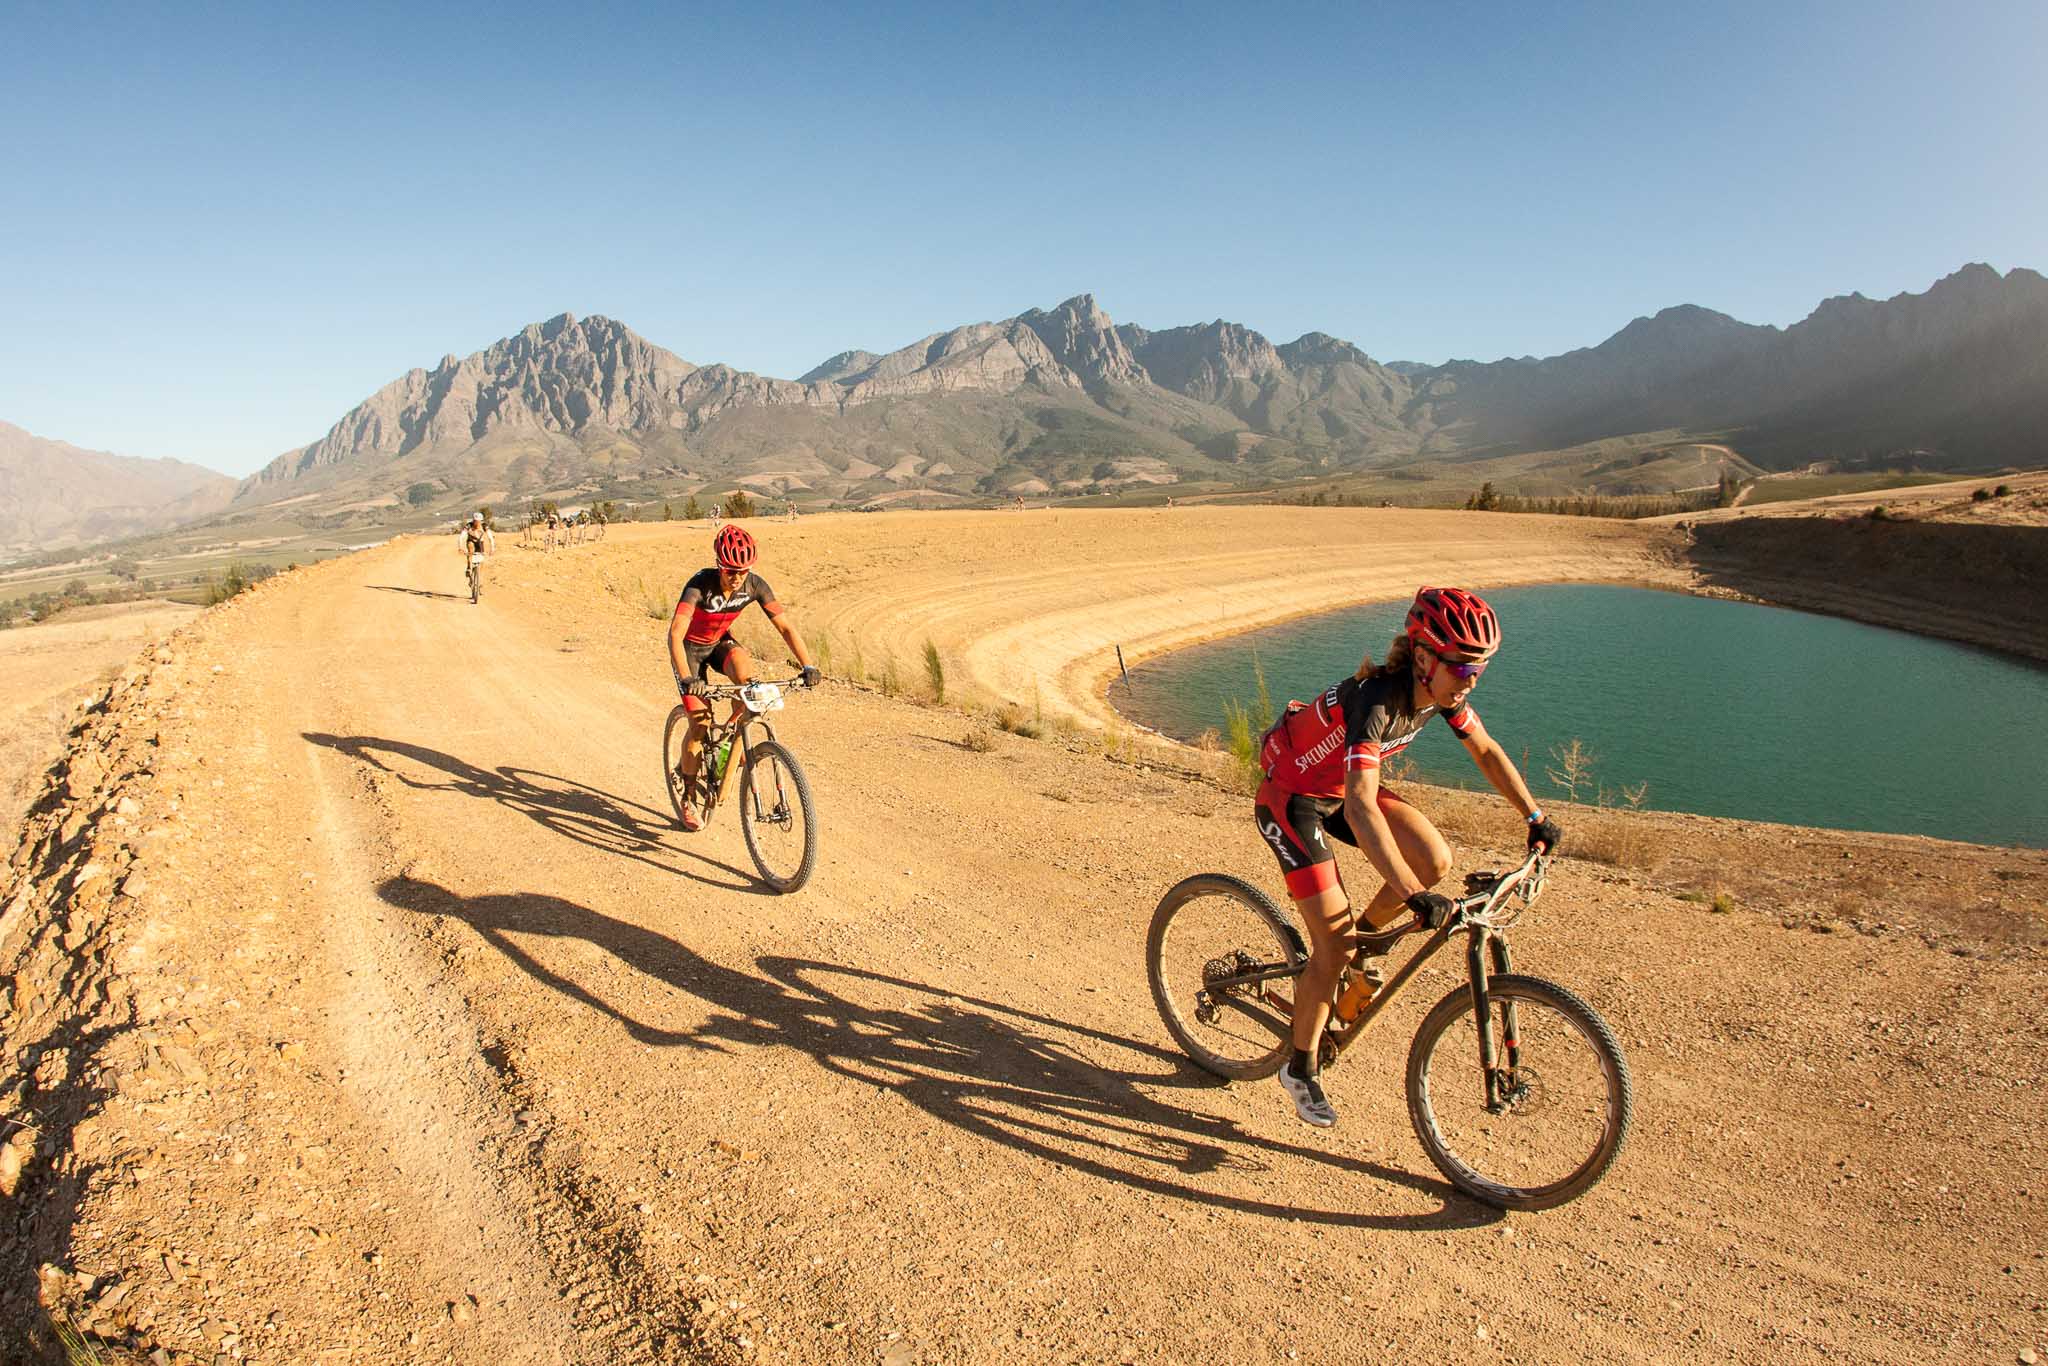 Ariane Kleinhans (R) and Annika Langvad (L) during stage 1 of the 2016 Absa Cape Epic Mountain Bike stage race held from Saronsberg Wine Estate in Tulbagh, South Africa on the 14th March 2016 Photo by Sam Clark/Cape Epic/SPORTZPICS PLEASE ENSURE THE APPROPRIATE CREDIT IS GIVEN TO THE PHOTOGRAPHER AND SPORTZPICS ALONG WITH THE ABSA CAPE EPIC {ace2016}